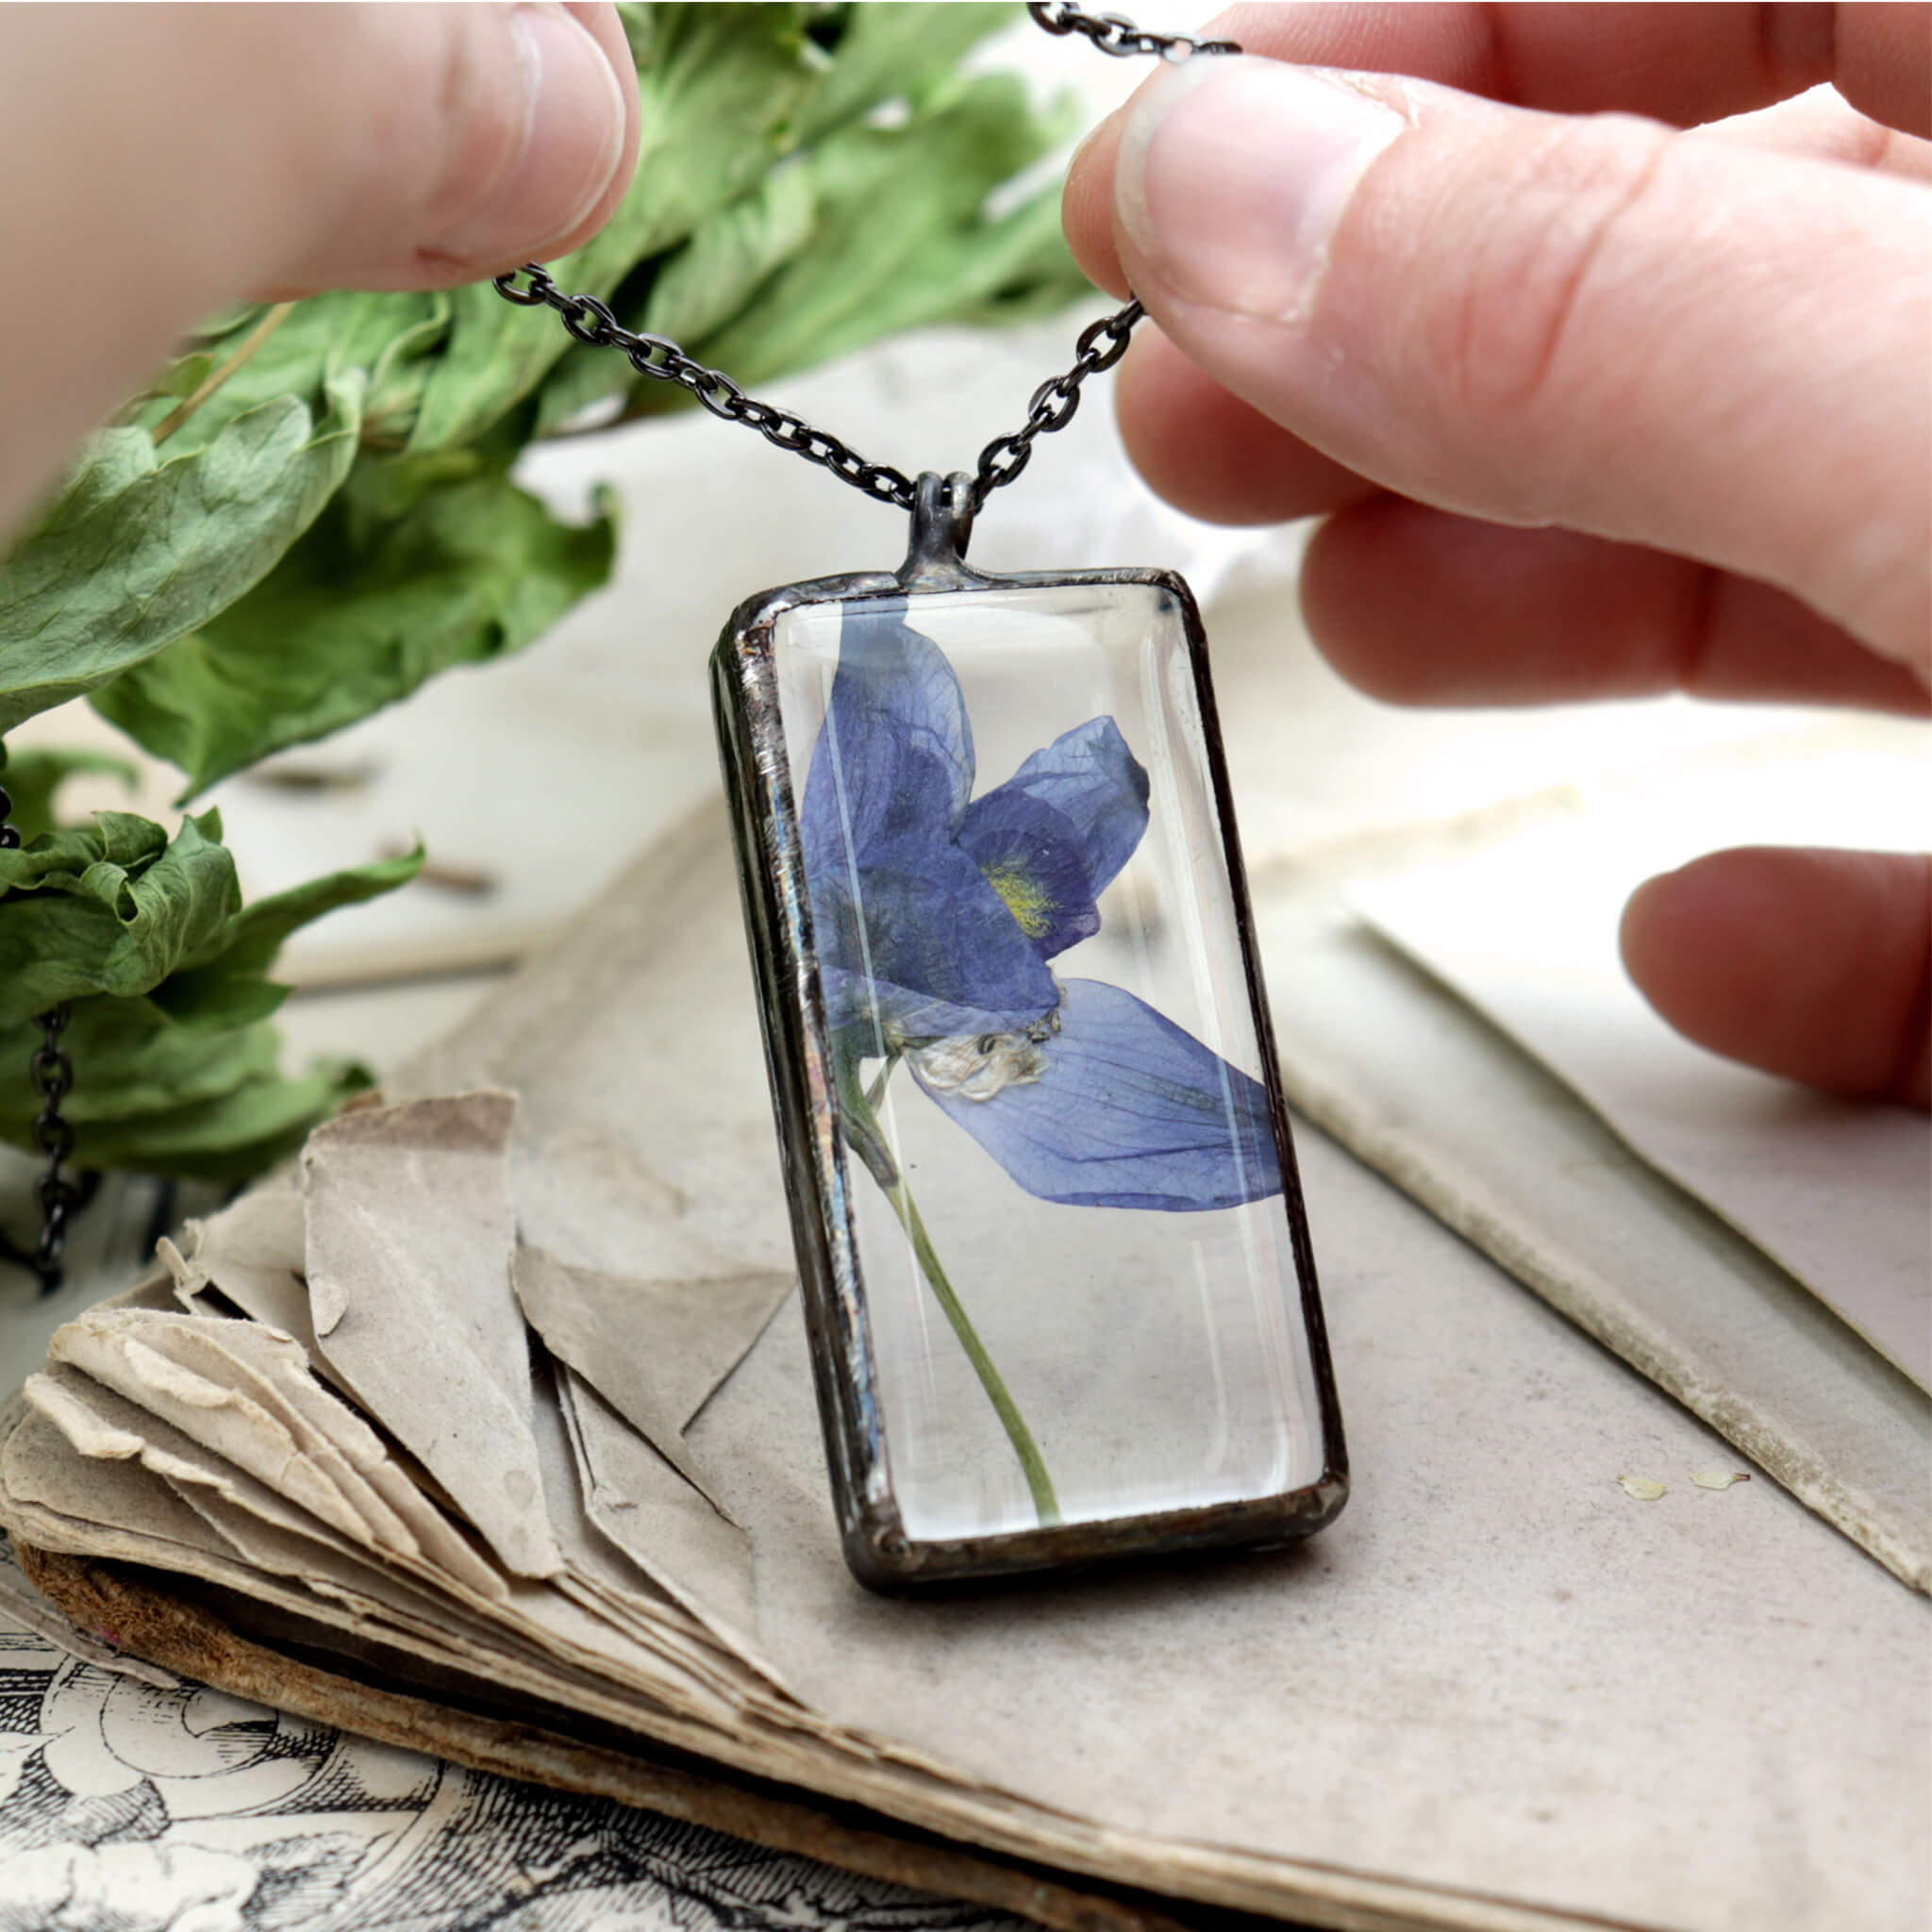 Hands holding a blue pressed flower in a rectangular glass soldered necklace